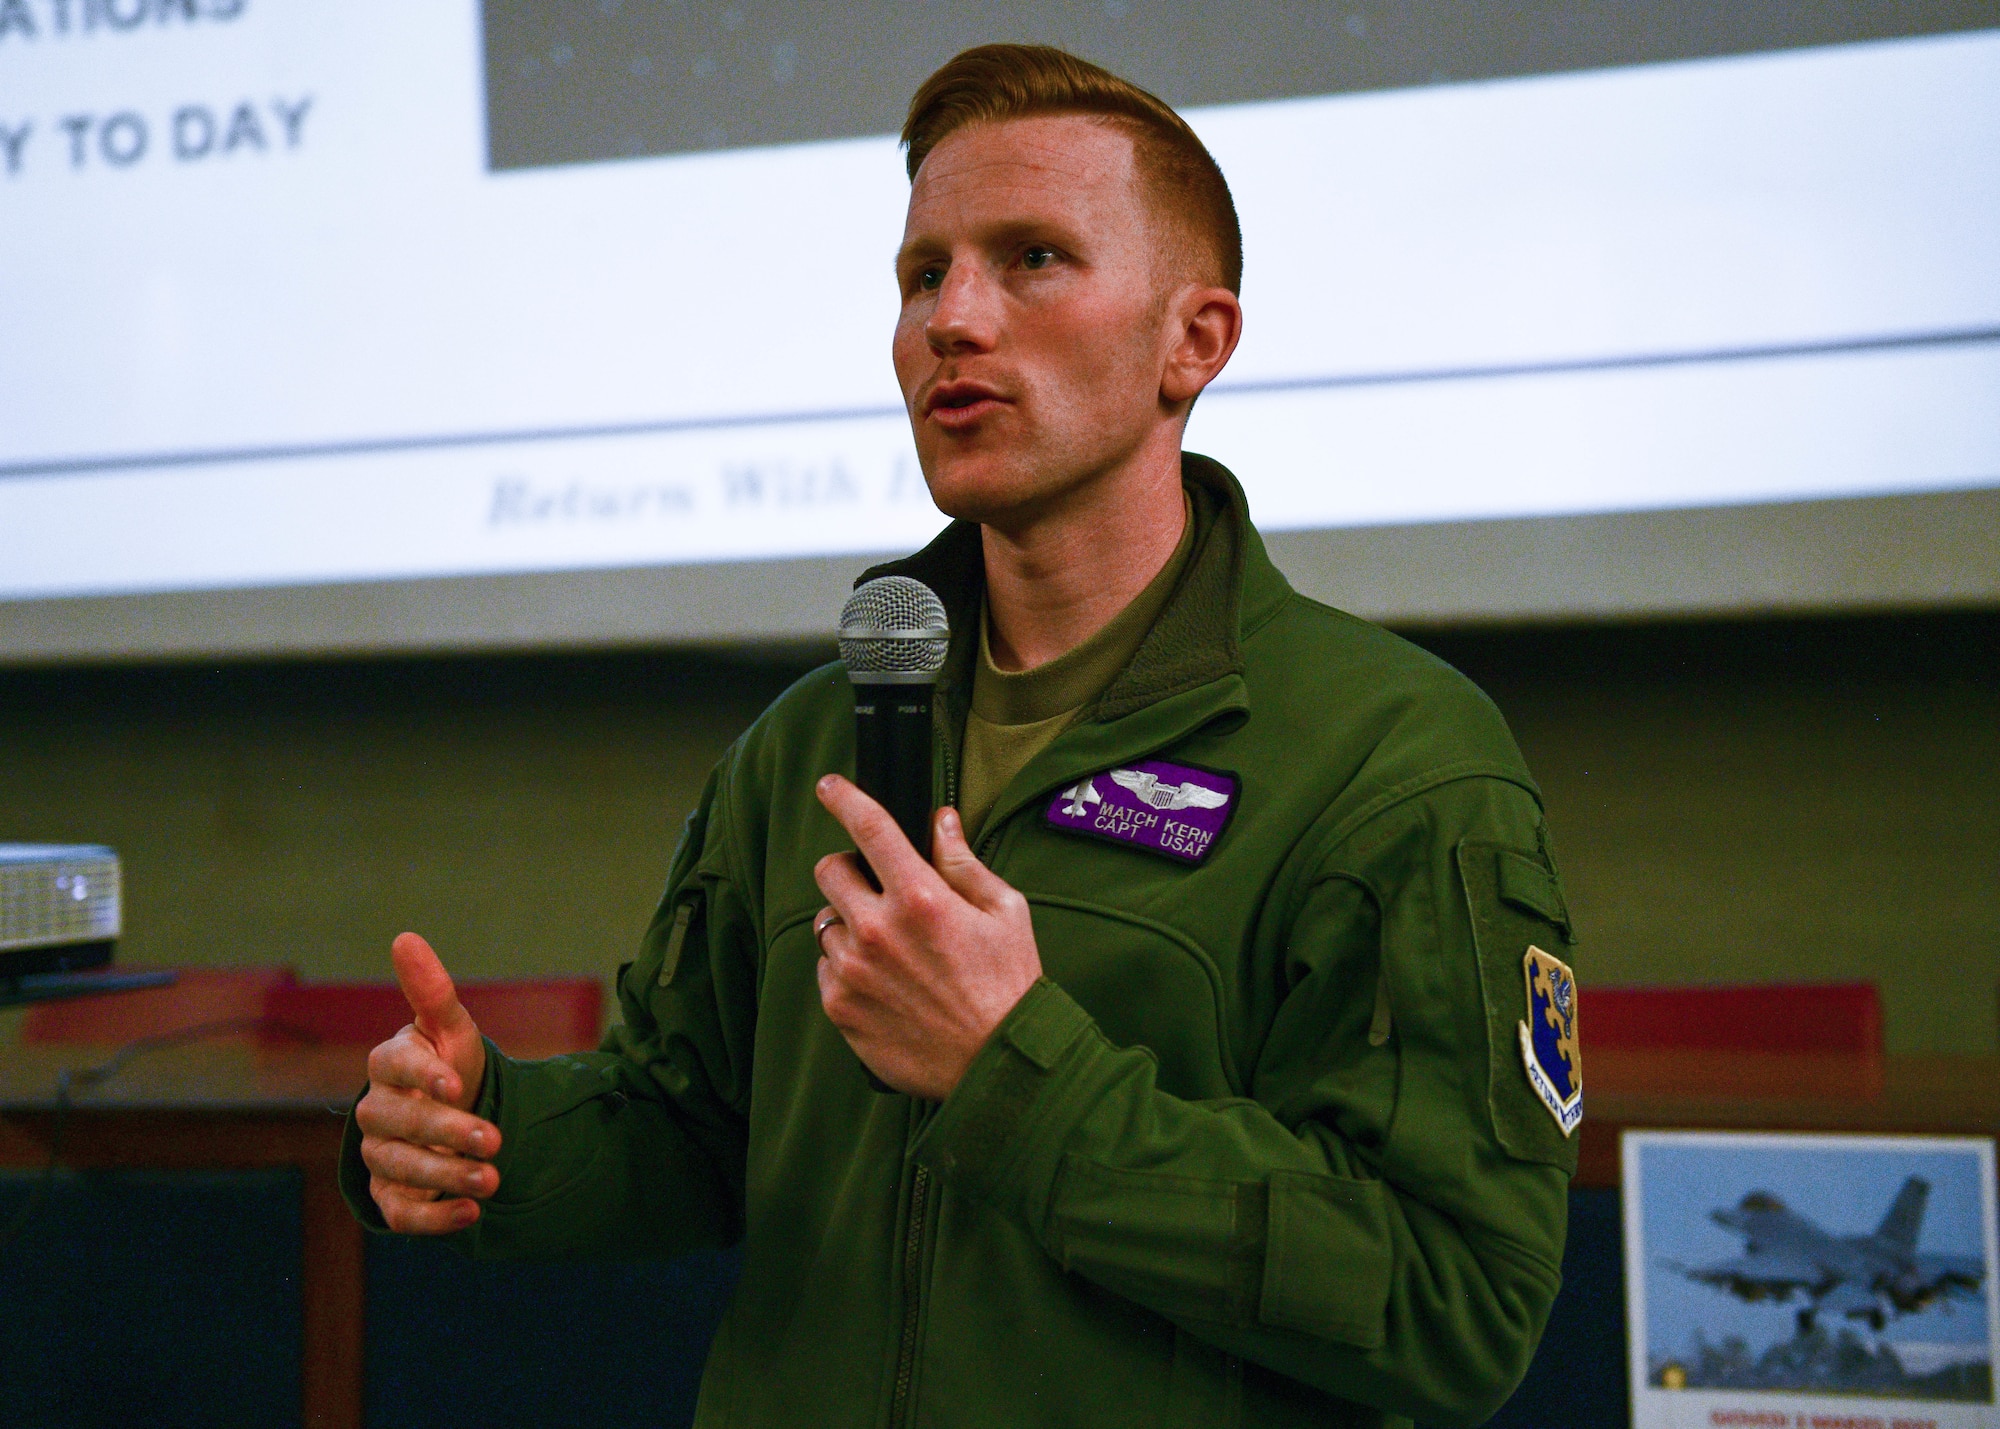 U.S. Air Force Capt. Ben Kern, 510th Fighter Squadron F-16 Fighting Falcon pilot, speaks to high school aeronautical students at the Malignani Aeronautical Institute in Udine, Italy, March 3, 2022. A pilot and maintainer from the 31st Fighter Wing and the Italian base commander spoke in front of approximately 60 aeronautical high school students and shared their experiences of being in the military. (U.S. Air Force photo by Senior Airman Brooke Moeder)